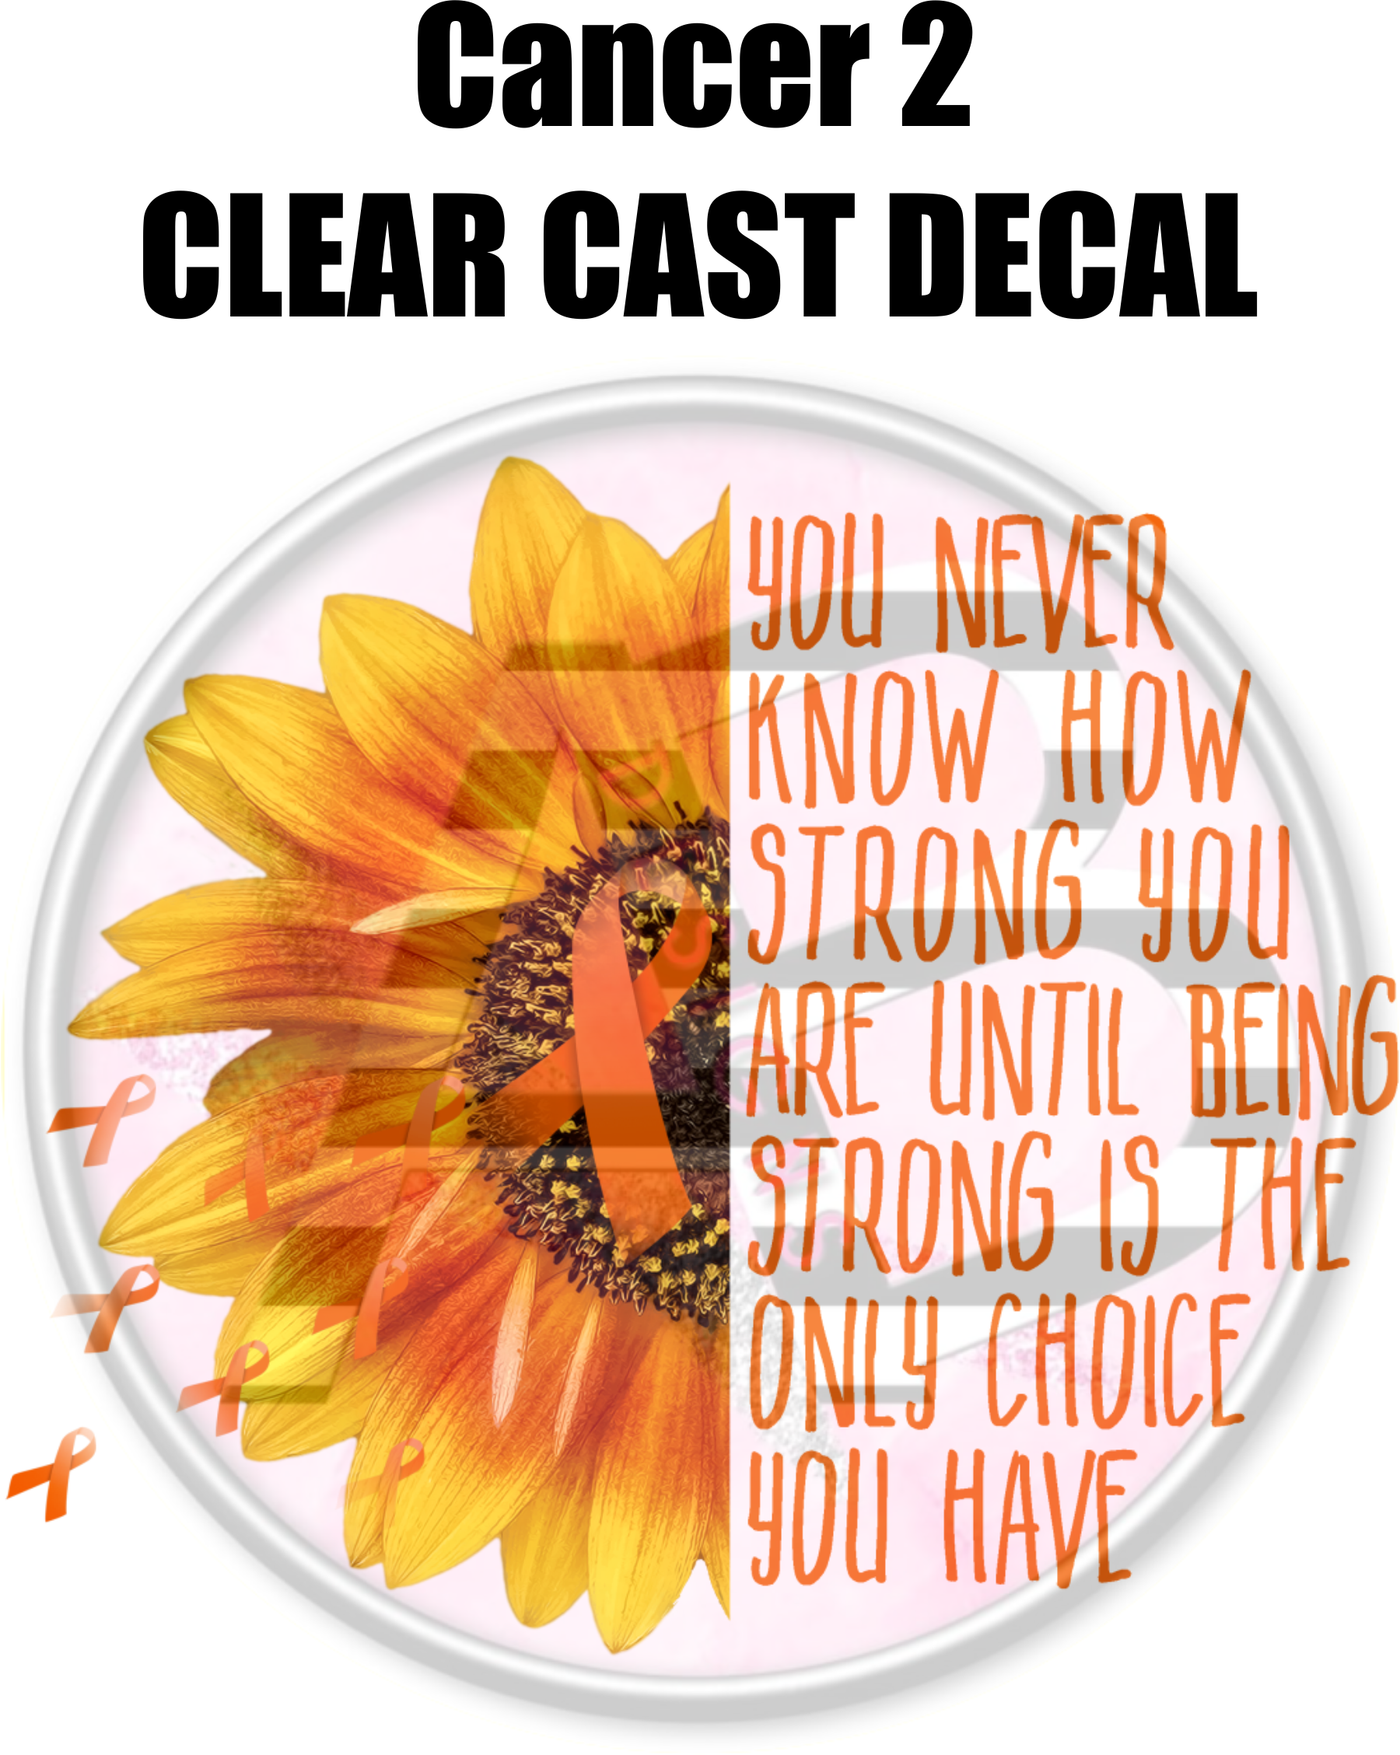 Cancer 2 - Clear Cast Decal